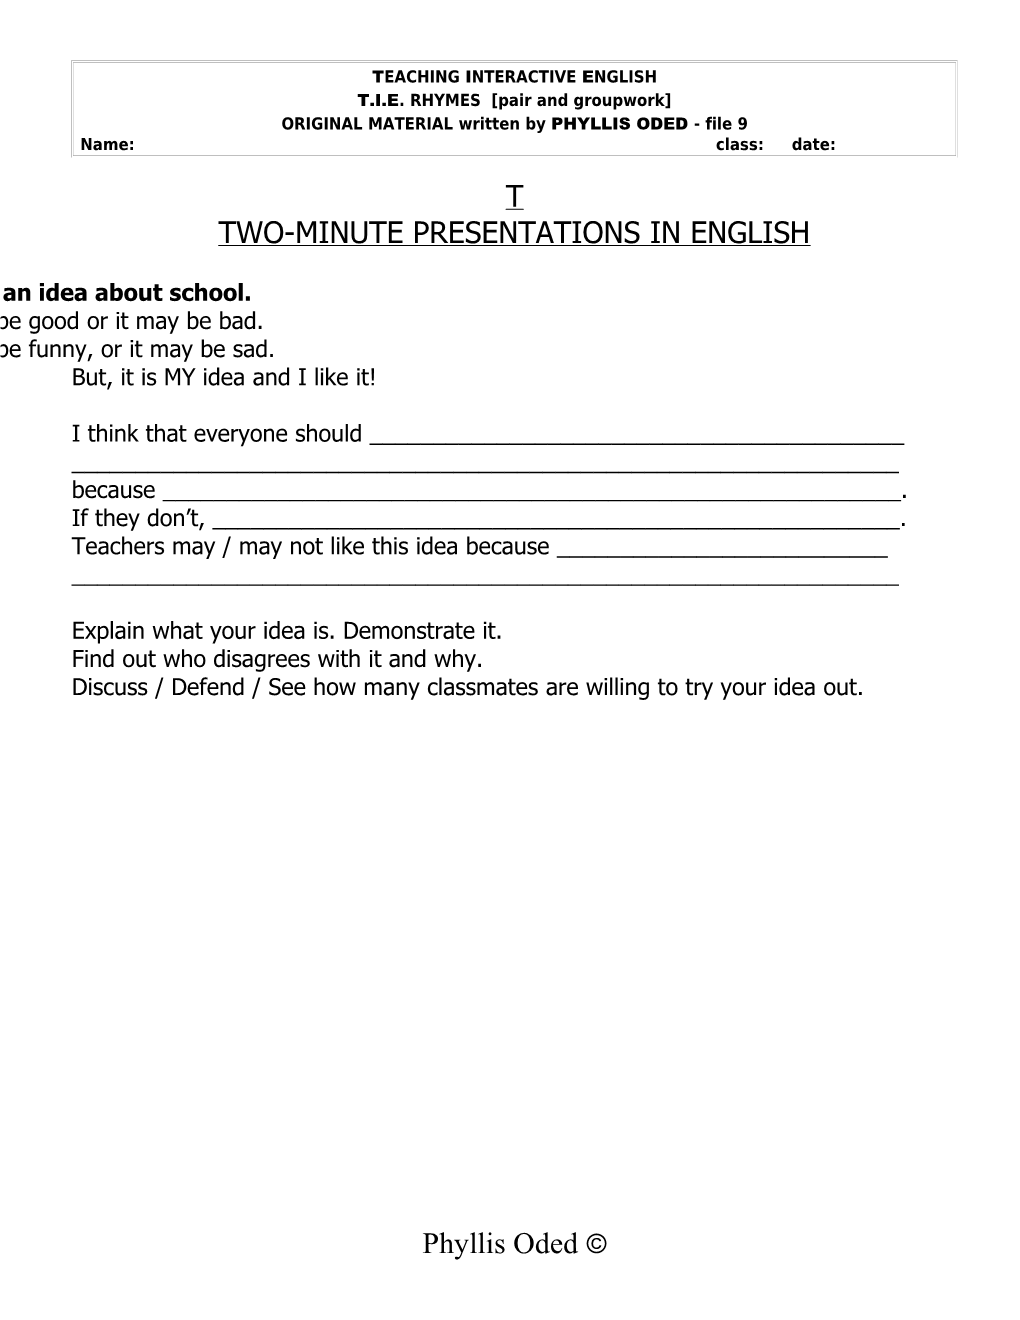 Two-Minute Presentations in English